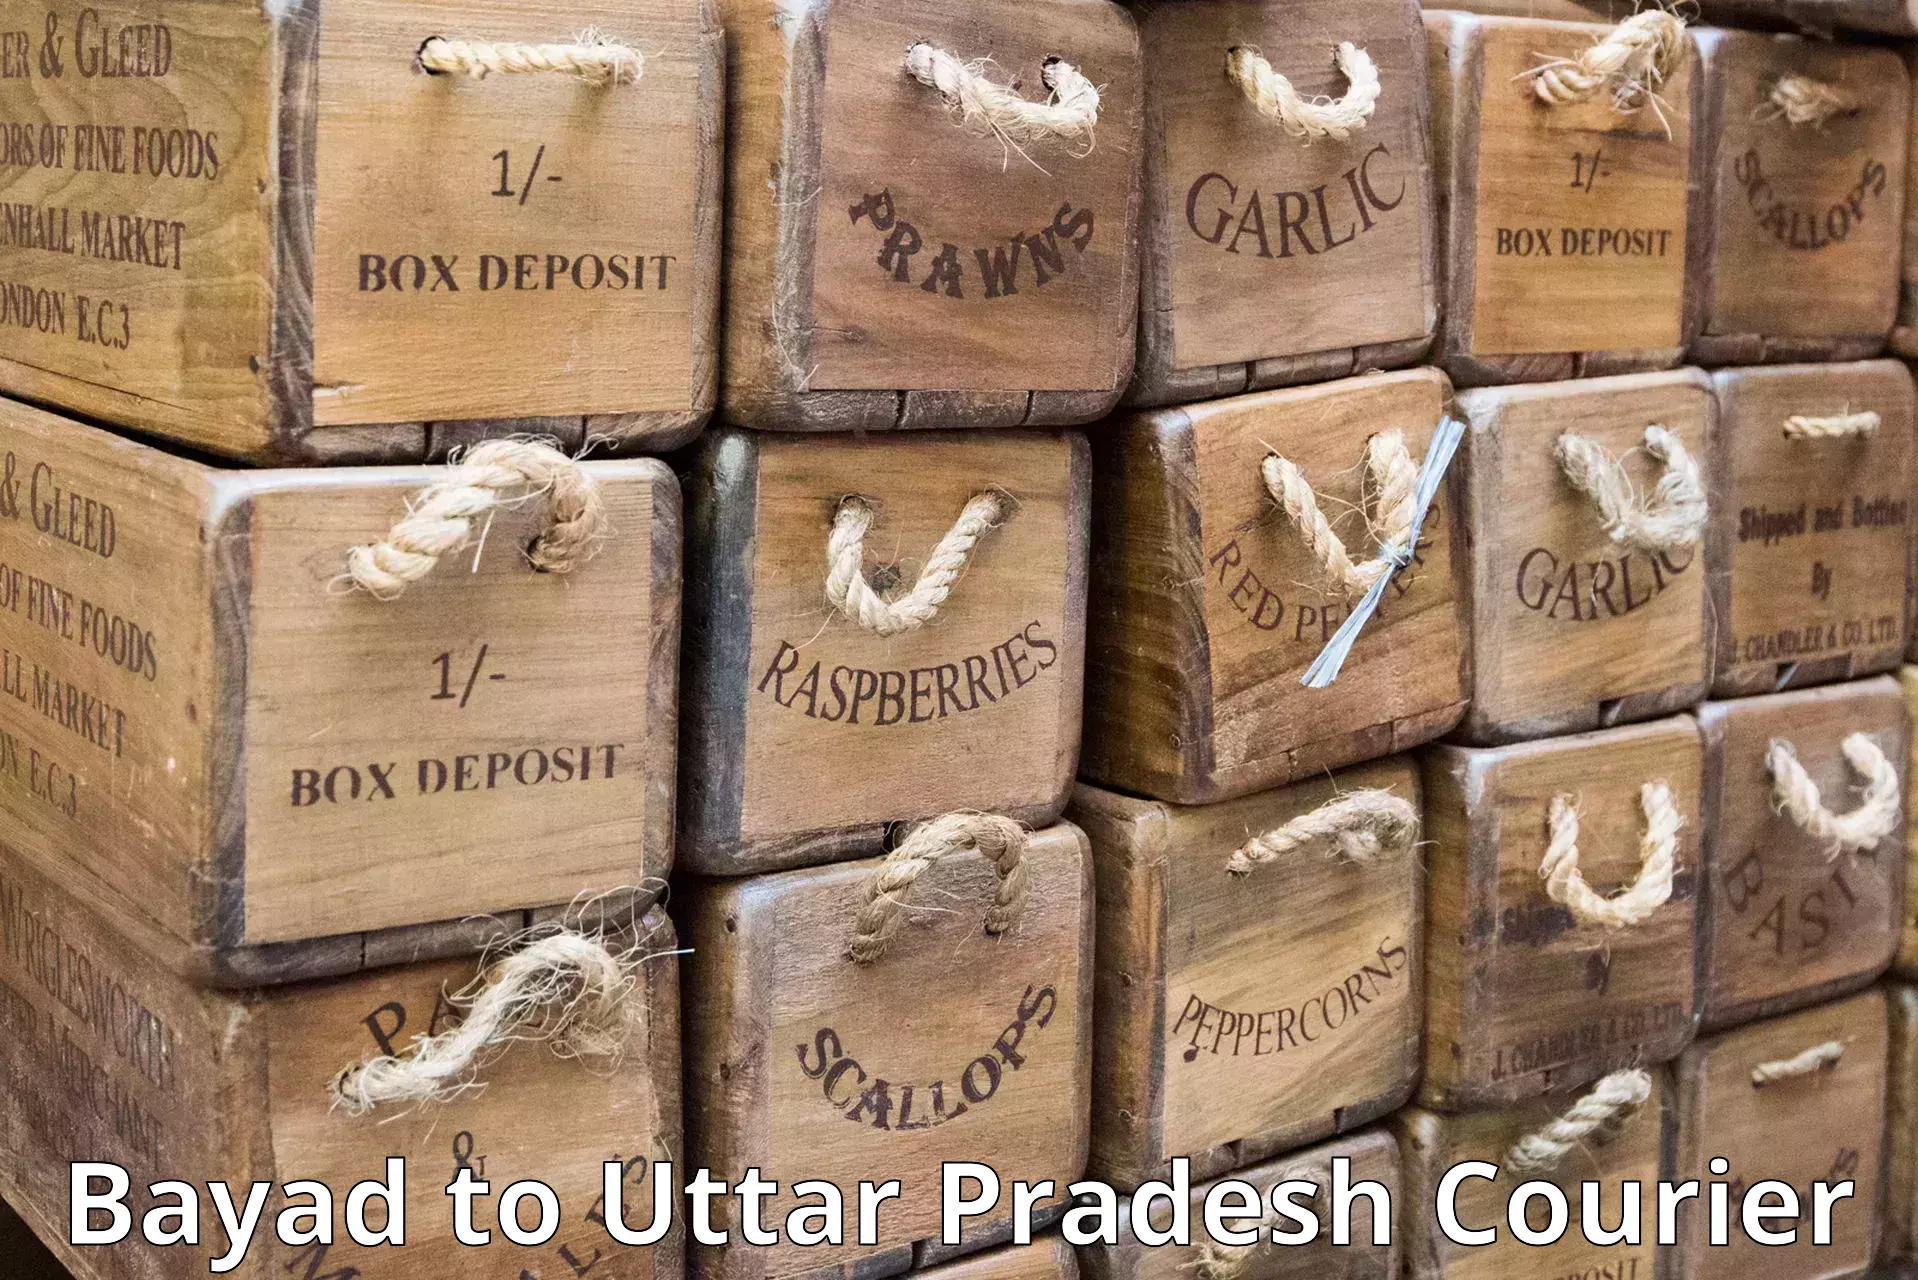 Courier dispatch services Bayad to Aligarh